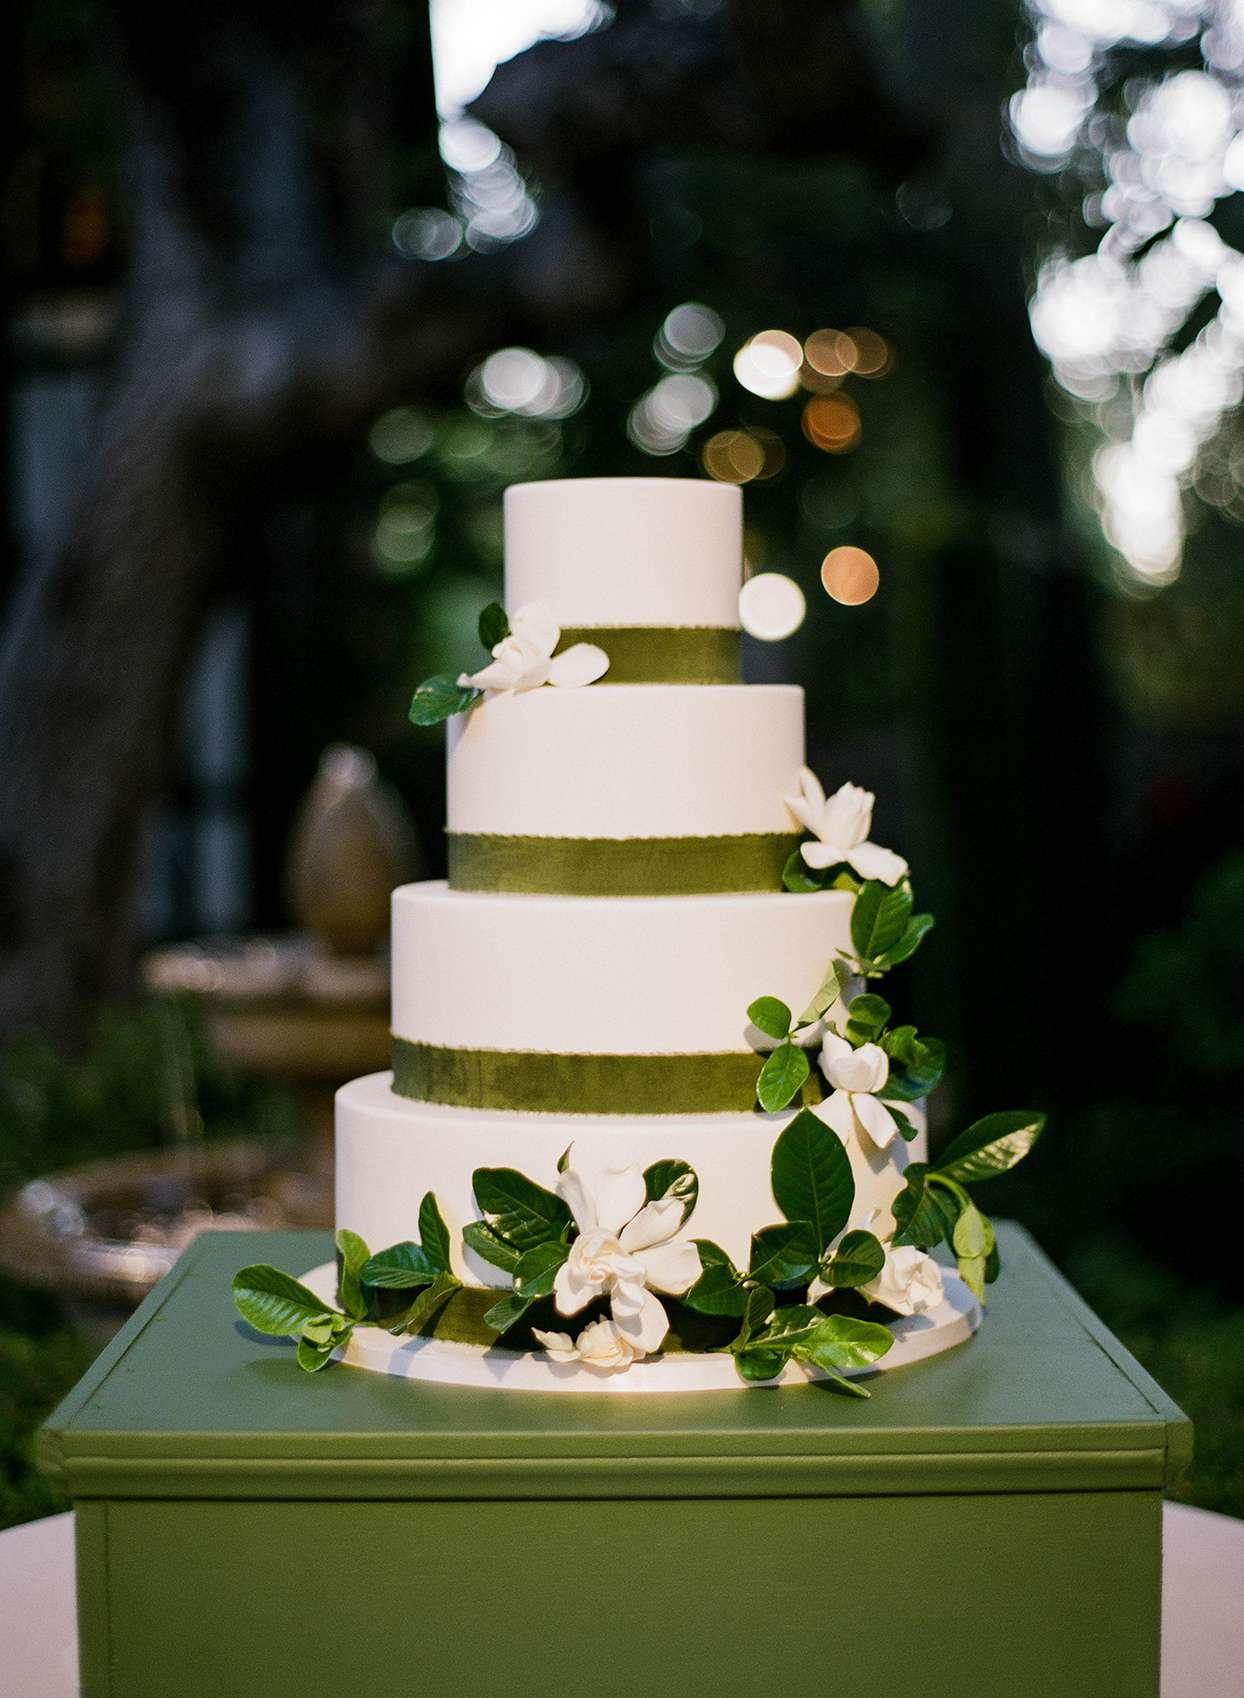 four tiered white wedding cake with green ribbons and flowers